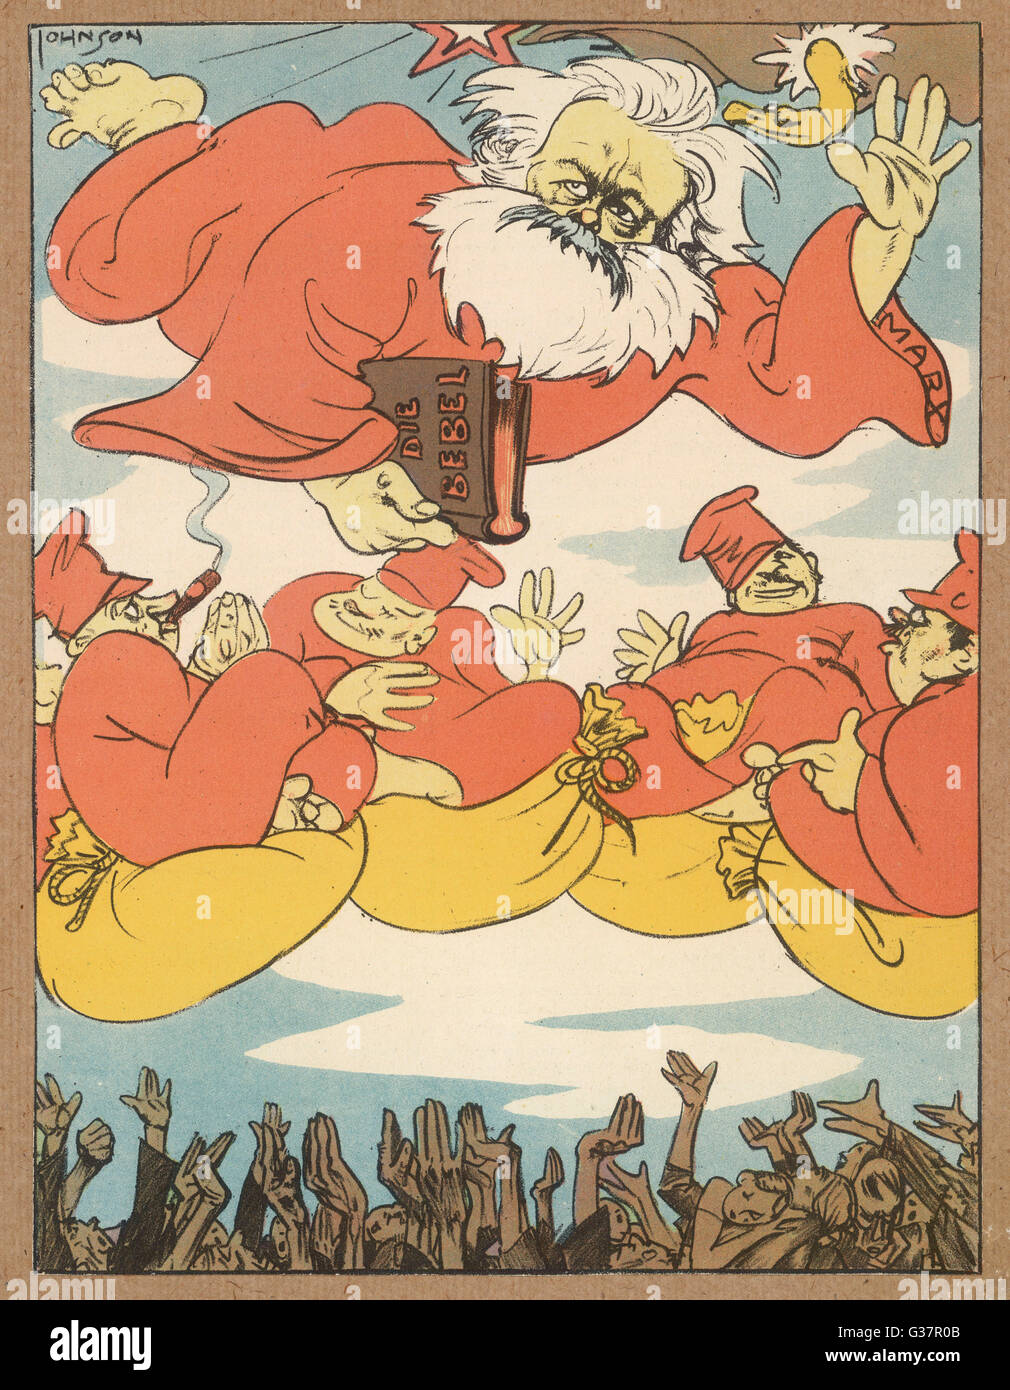 Satire : Marxism is great for  the party leaders but not so  hot for the common people. Marx and some party leaders  fly through the air  above the common people     Date: 1931 Stock Photo